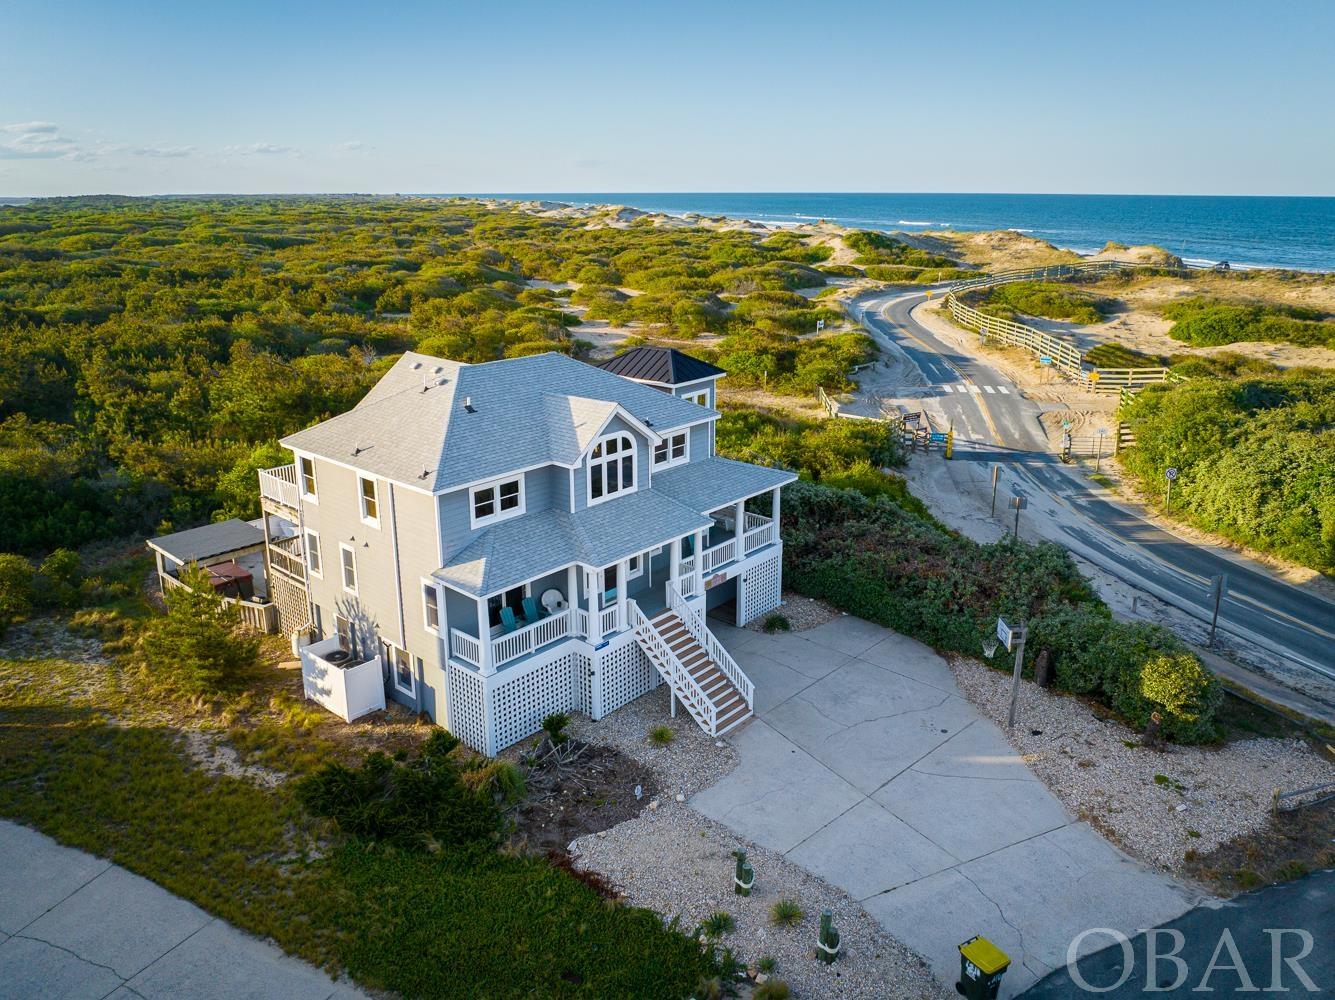 Updated with one-of-a-kind views! Welcome to “Double Anchor,” as one of the northernmost homes in Corolla Village, this unique 7-bedroom home in the Villages at Ocean Hill is located on the very north edge of Corolla's paved road, just before the 4x4 beaches. There is no 4WD needed to enjoy these scenic views, perhaps one of the many reasons why this home has been a consistent rental income generator, with over 140K on the books for 2023. As an ultimate coastal retreat, you'll enjoy overwhelmingly panoramic Atlantic Ocean views out of your back door, and privacy galore with the fenced in pool complex backing up to the wildlife preserve where the wild Spanish Mustangs roam. Easy and direct beach access is just steps away, and local attractions such as the Currituck Lighthouse, Corolla Adventure Park, shops and restaurants, and the Whalehead Club in Corolla Village are only a short bike ride or walk. The owners have taken meticulous care of this home, proactively updating all floors to either LVP, hardwoods, or tile in order to create an updated look, yet highly durable and easy to clean.  Soak up the sun in the private heated pool area or cool off and lounge beneath the shaded pergola. Several spacious decks equipped with poly-wood chairs and loungers offer plenty of space for relaxing comfortably outside. Designed with a reverse floorplan layout – these views are something you need to experience firsthand! The great room, updated kitchen, and dining are on the top level. The kitchen boasts stainless steel appliances and tasteful granite countertops. The top level is also home to a master bedroom with a new large soaking tub, perfect for relaxing after a long day on the beach. On the mid-level you’ll find four more bedrooms and a comfortable den, thoughtfully designed to add that extra multi-use space. The first level is equipped with a game room with pool table, wet bar and full-size fridge, and has direct access to the pool area.  A full bath and the final two bedrooms are also located on the bottom floor.  Recent major updates include:  New roof in 2021, New HVACs in 2021, updated bathrooms, landscaping, decking converted to Trex, siding updated, all new bed mattresses, numerous windows replaced, and upgraded pool area in 2022! Full list of updates/improvements available upon request!